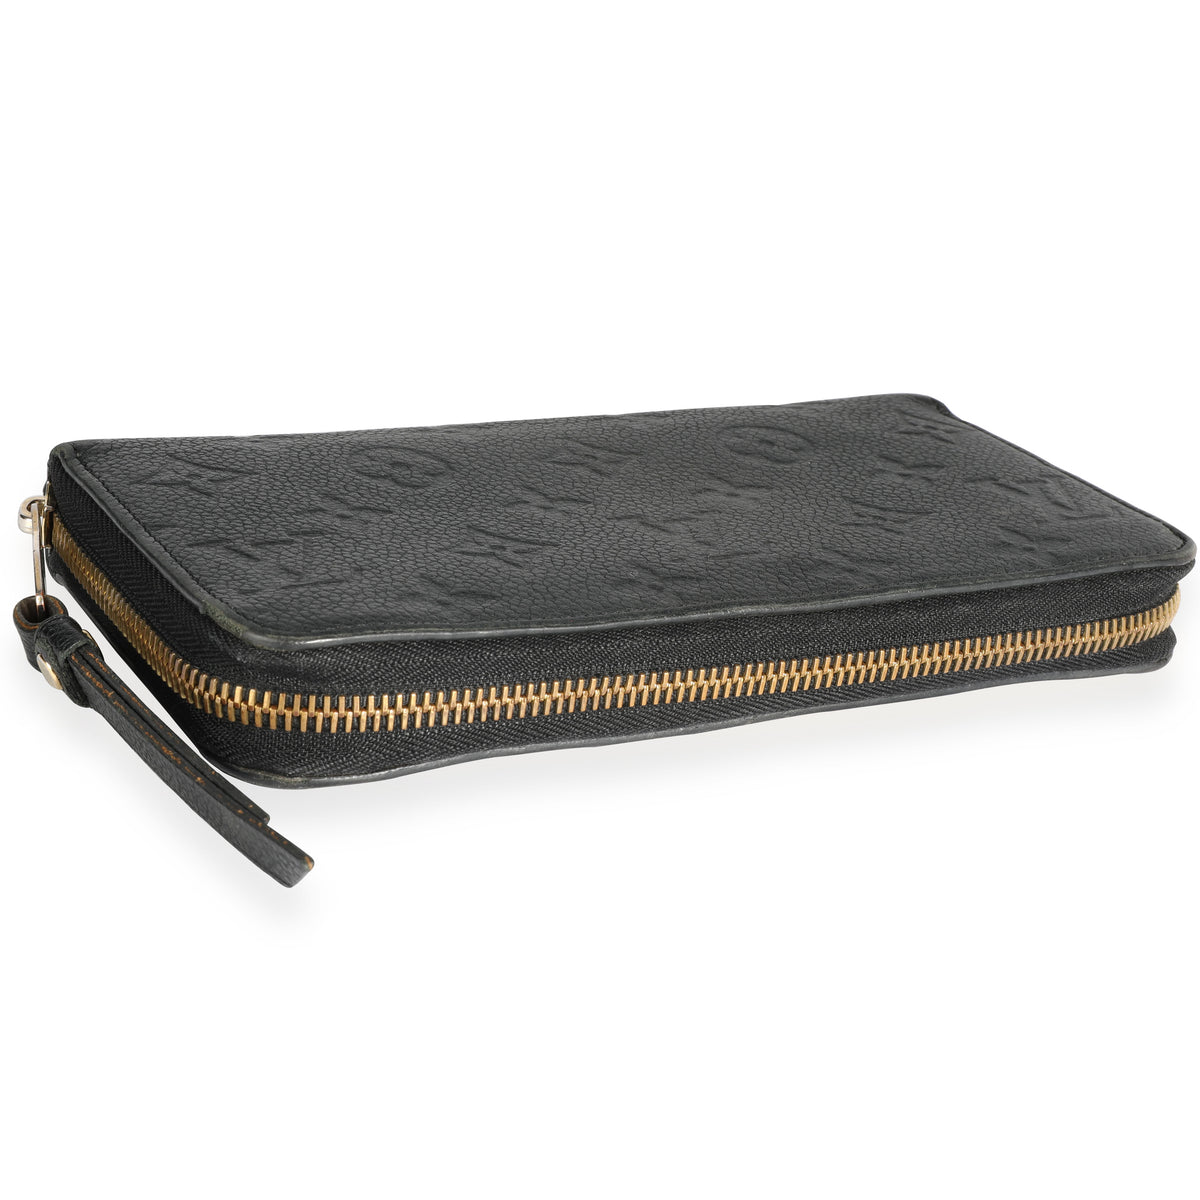 Zippy Wallet Monogram Empreinte Leather - Wallets and Small Leather Goods